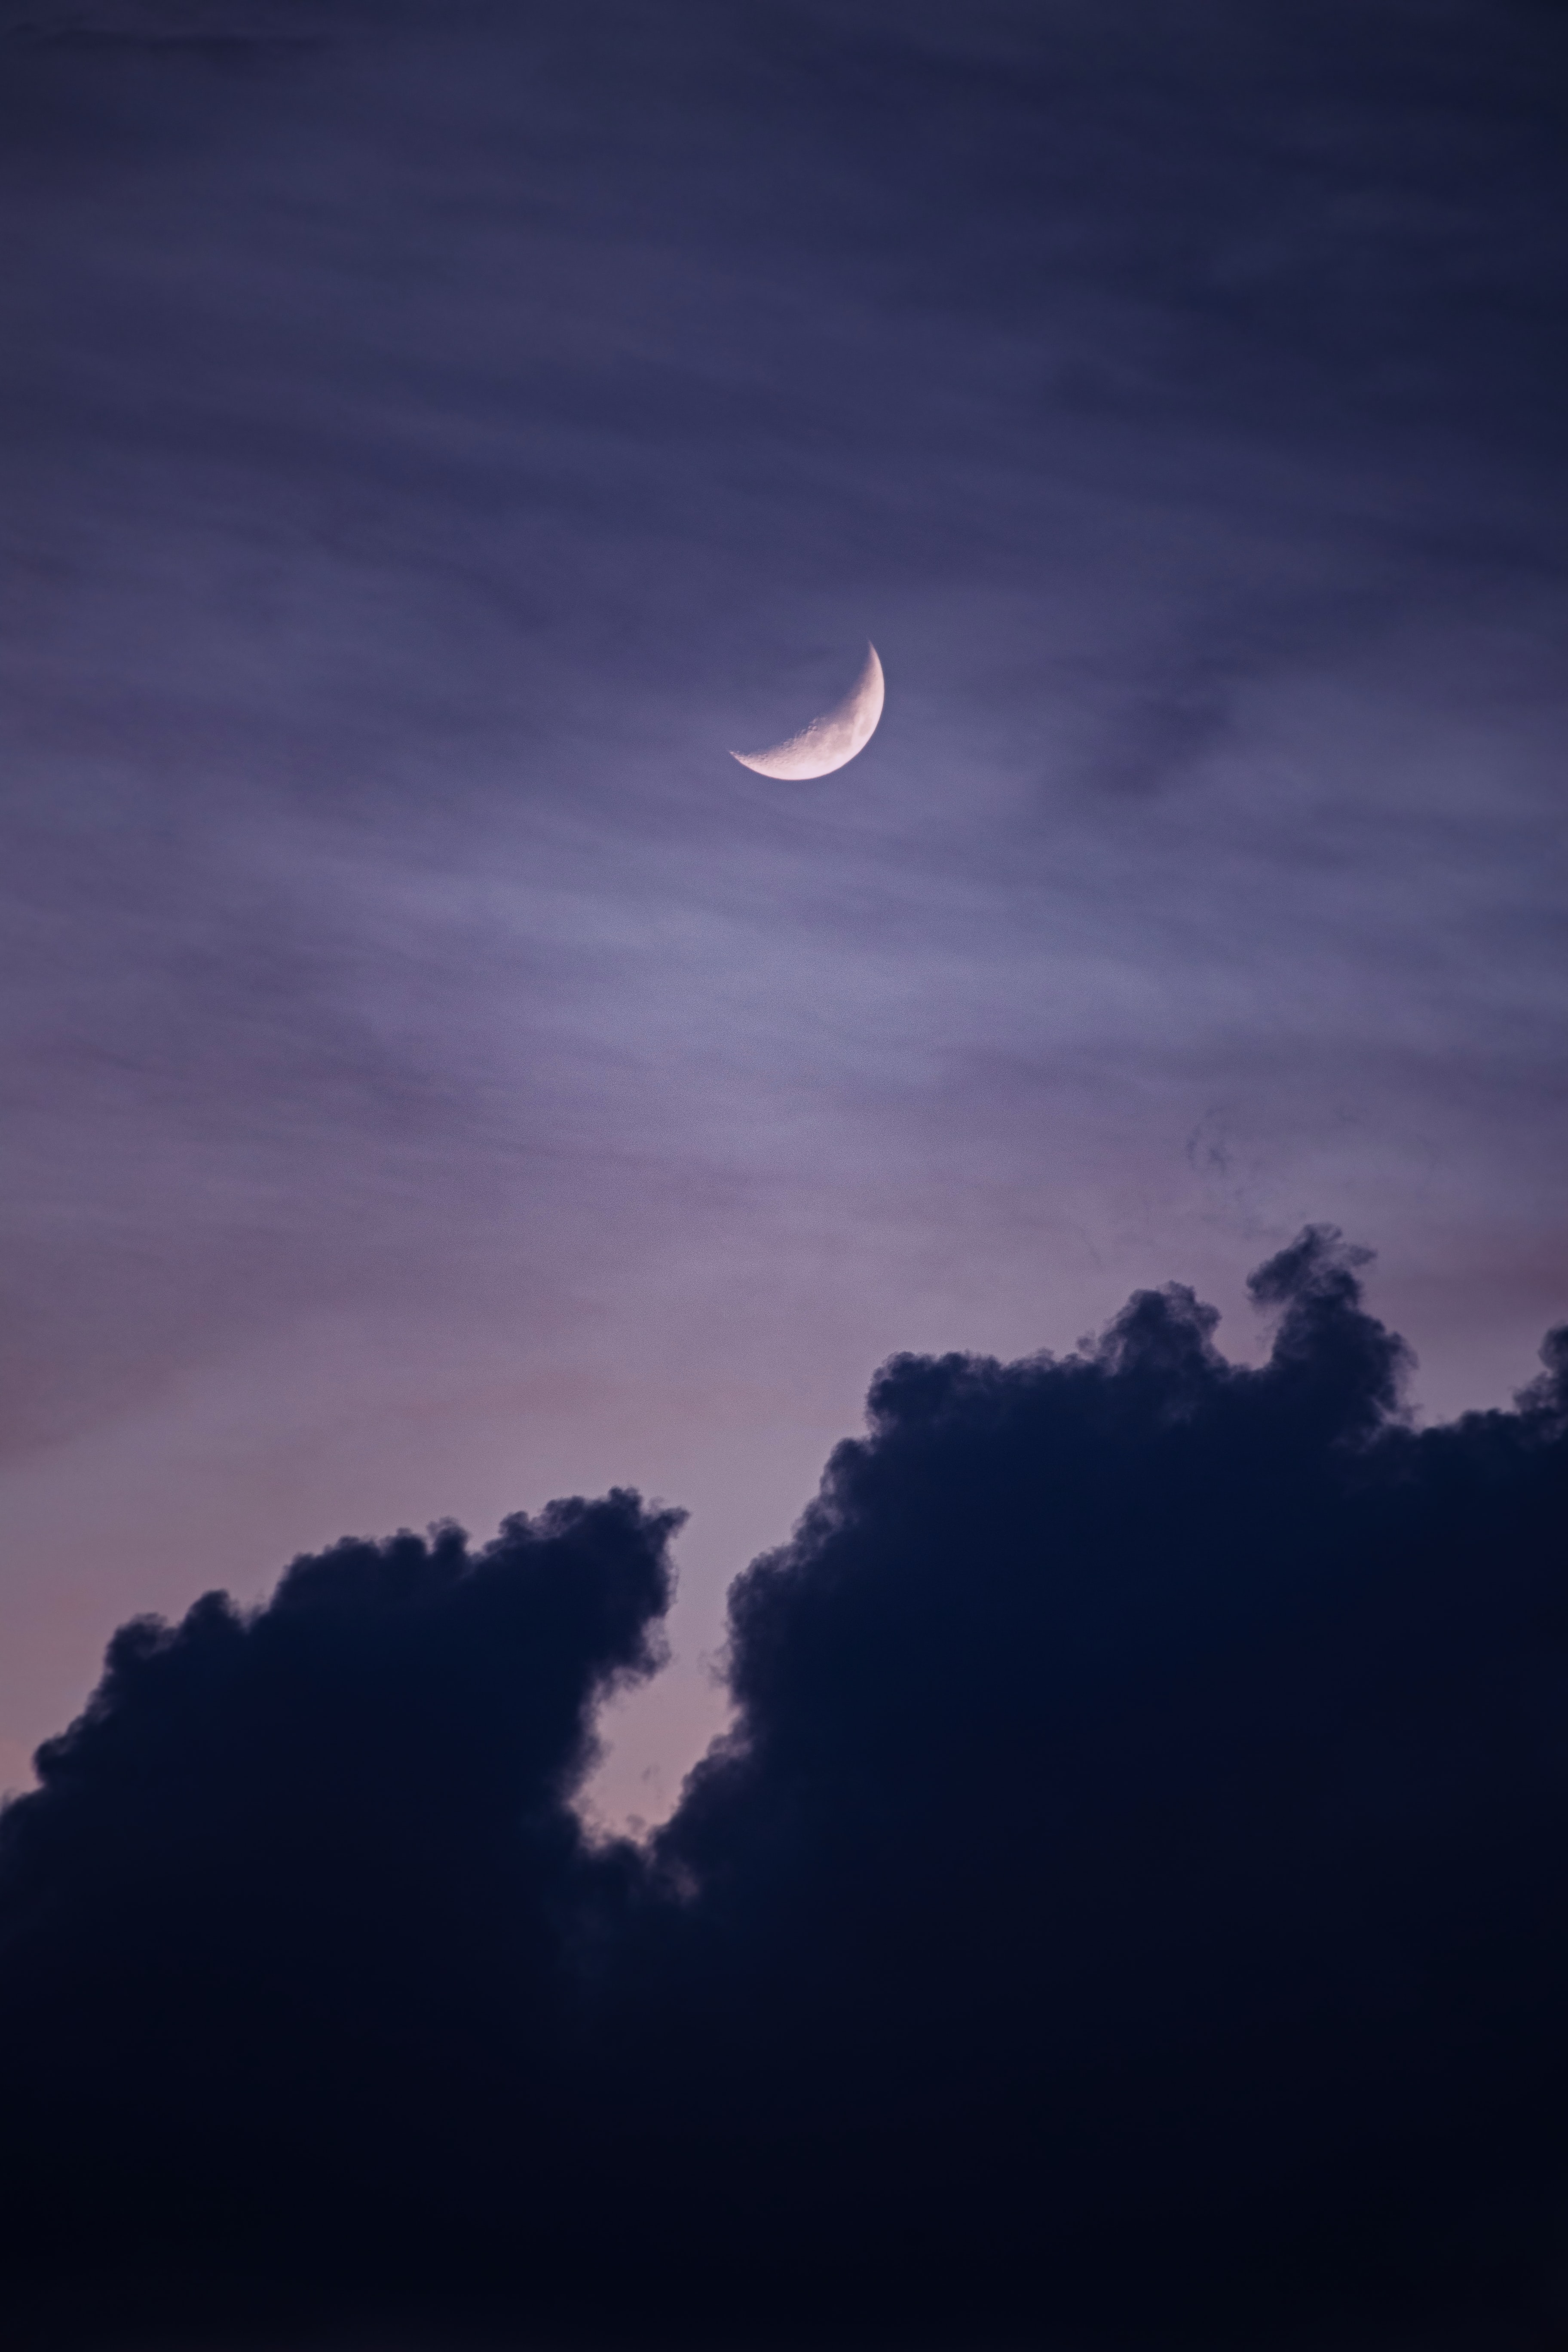 mainly cloudy, nature, sky, clouds, moon, overcast Desktop home screen Wallpaper